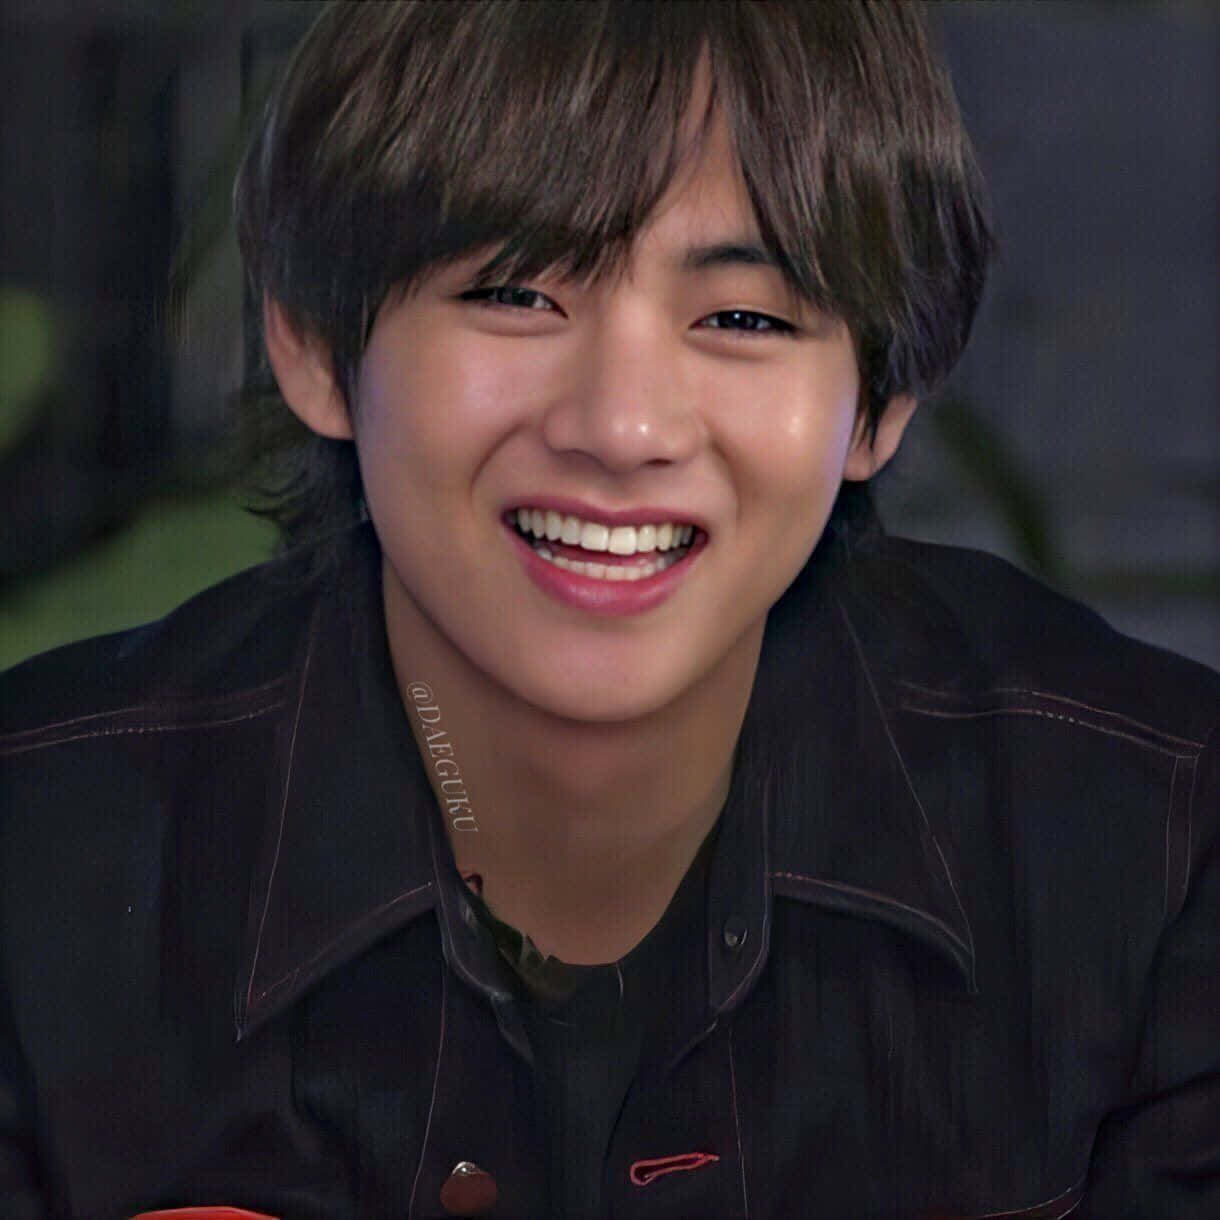 “Taehyung Cute, Adorable and Ready to Make You Smile!”